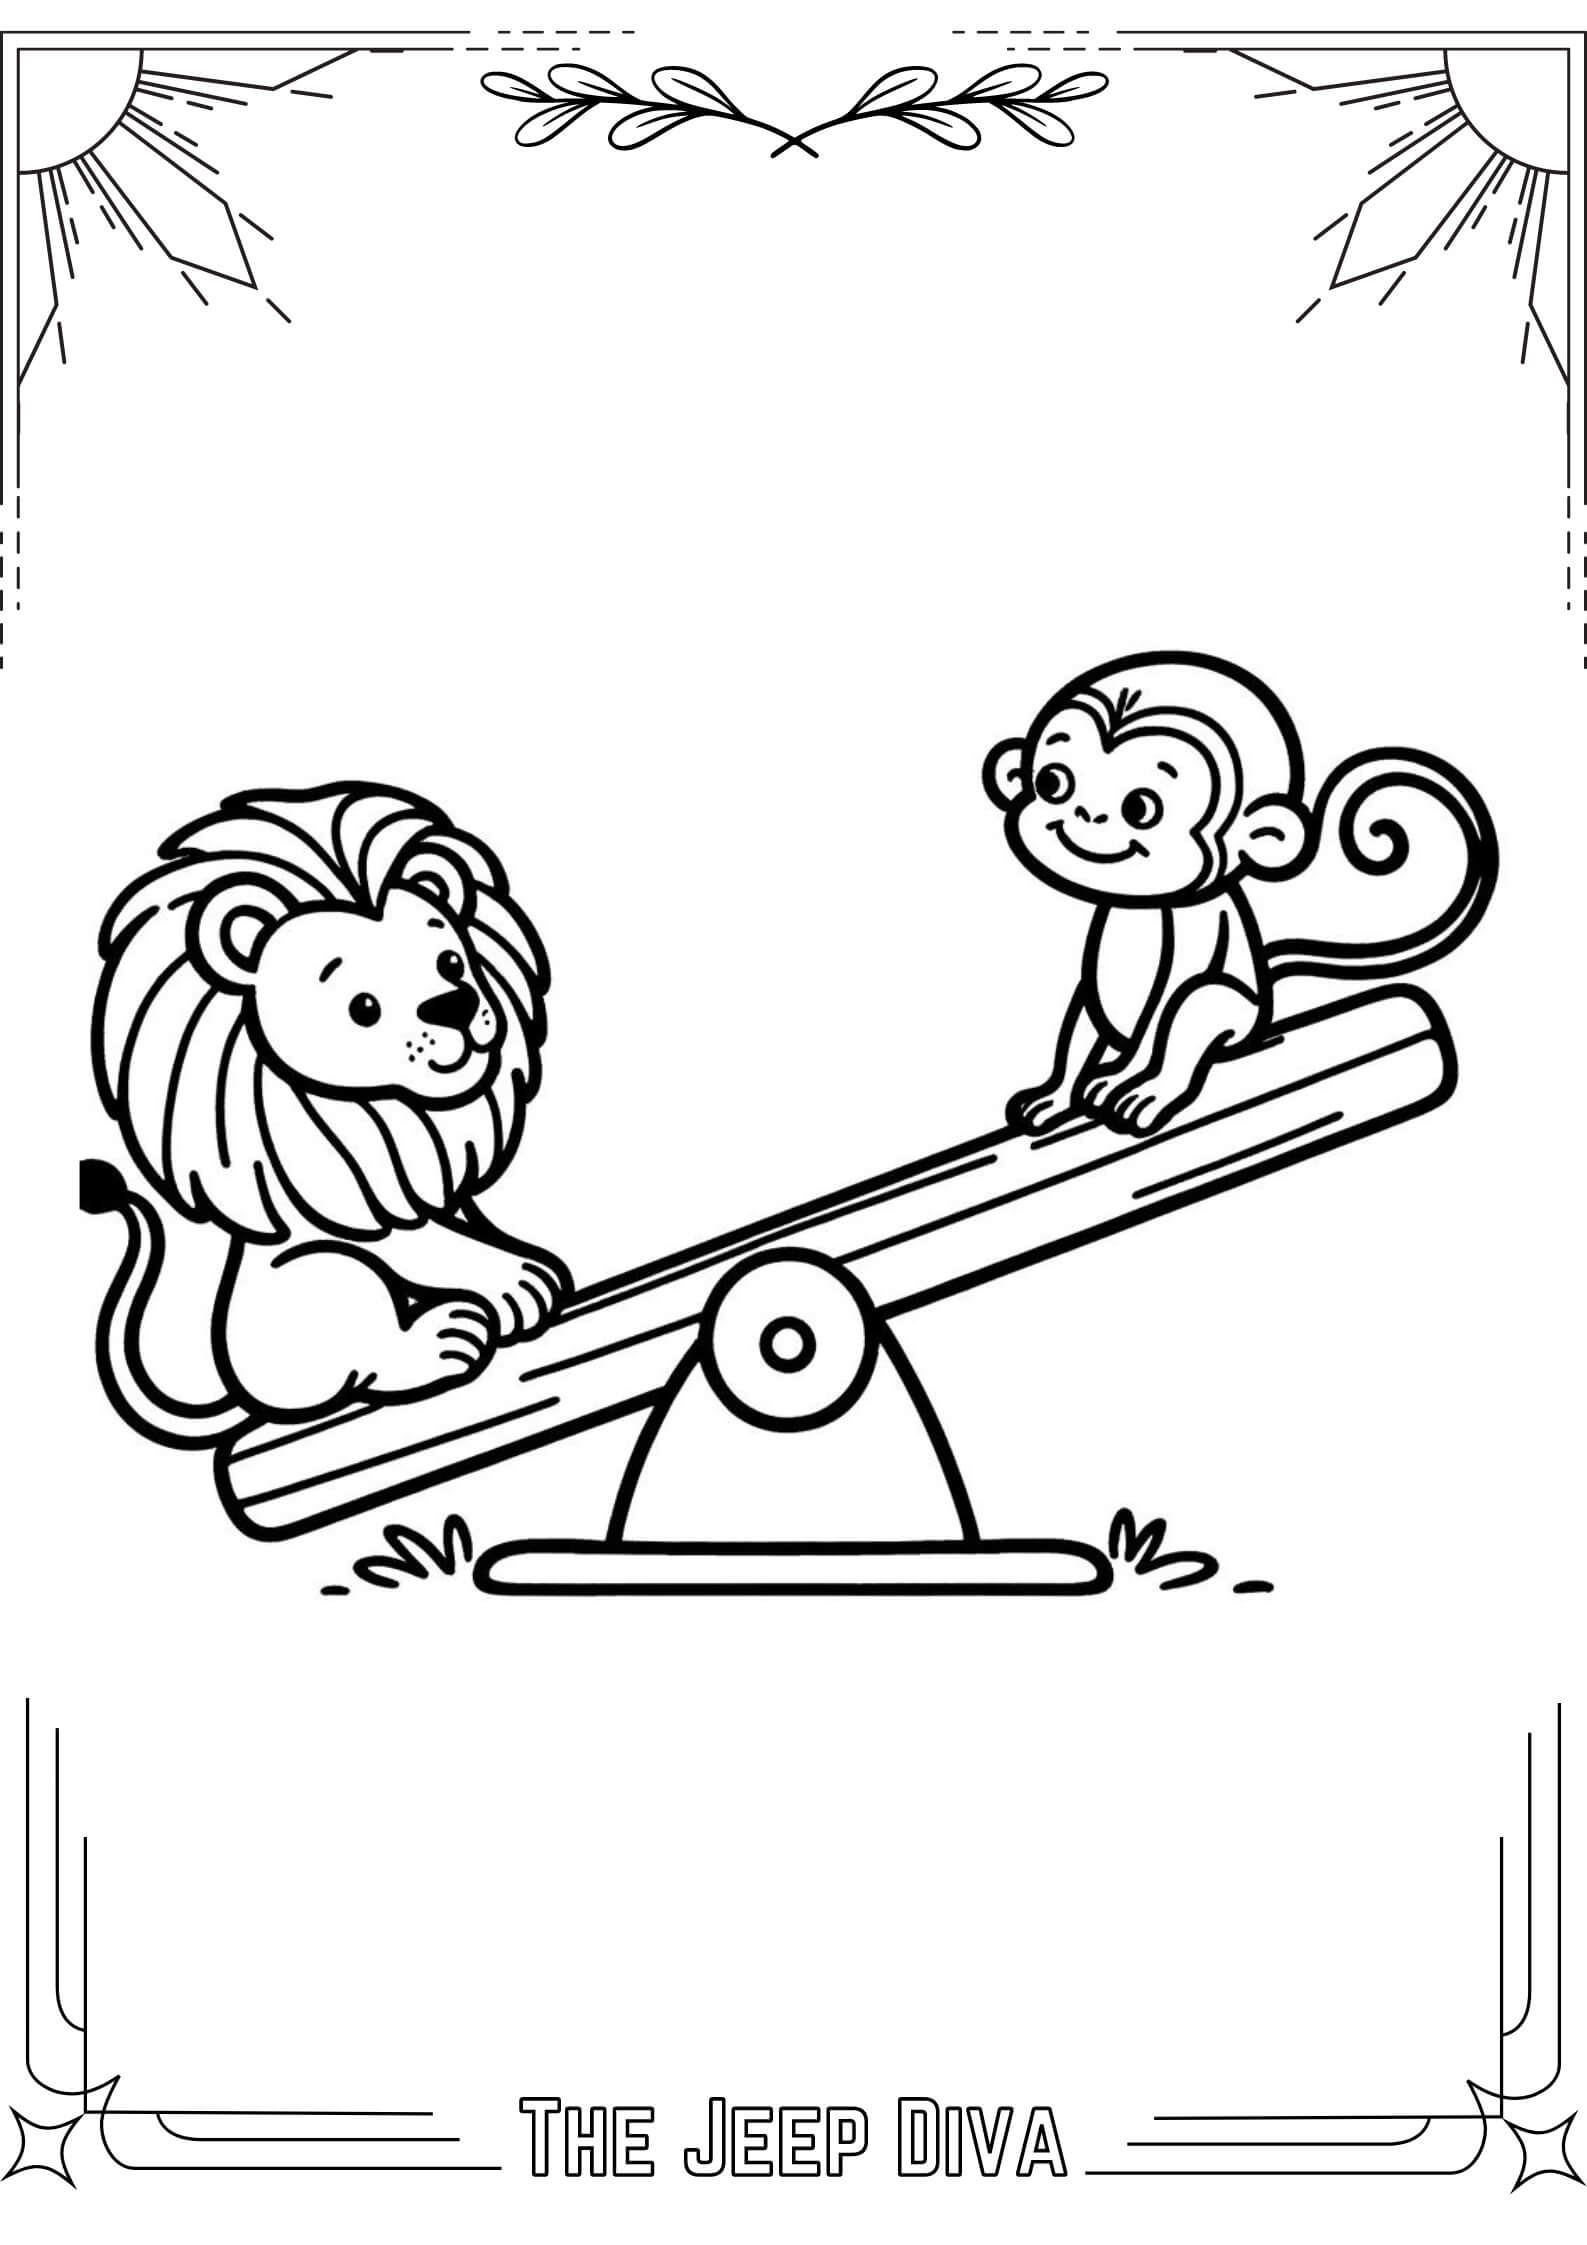 The Jeep Diva Coloring Page Lion Medium Difficulty 3